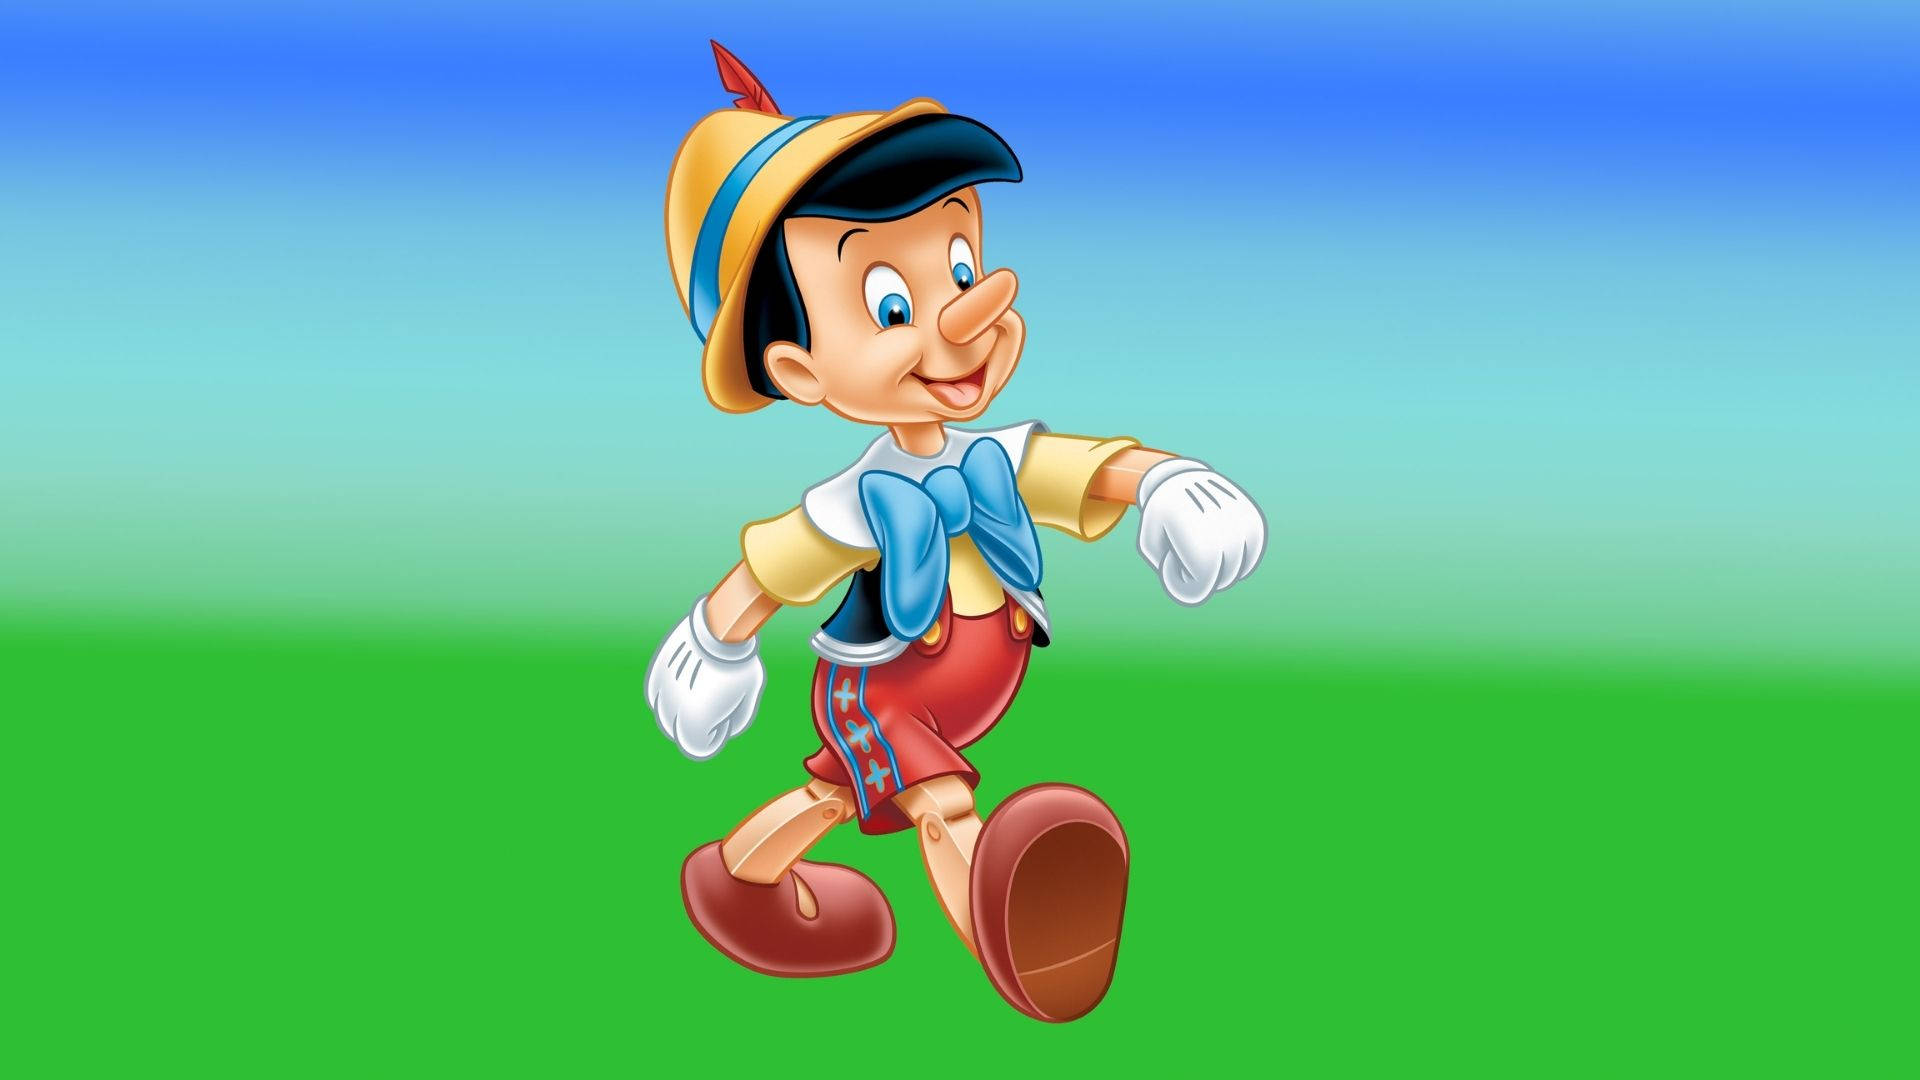 Pinocchio passing by wallpaper